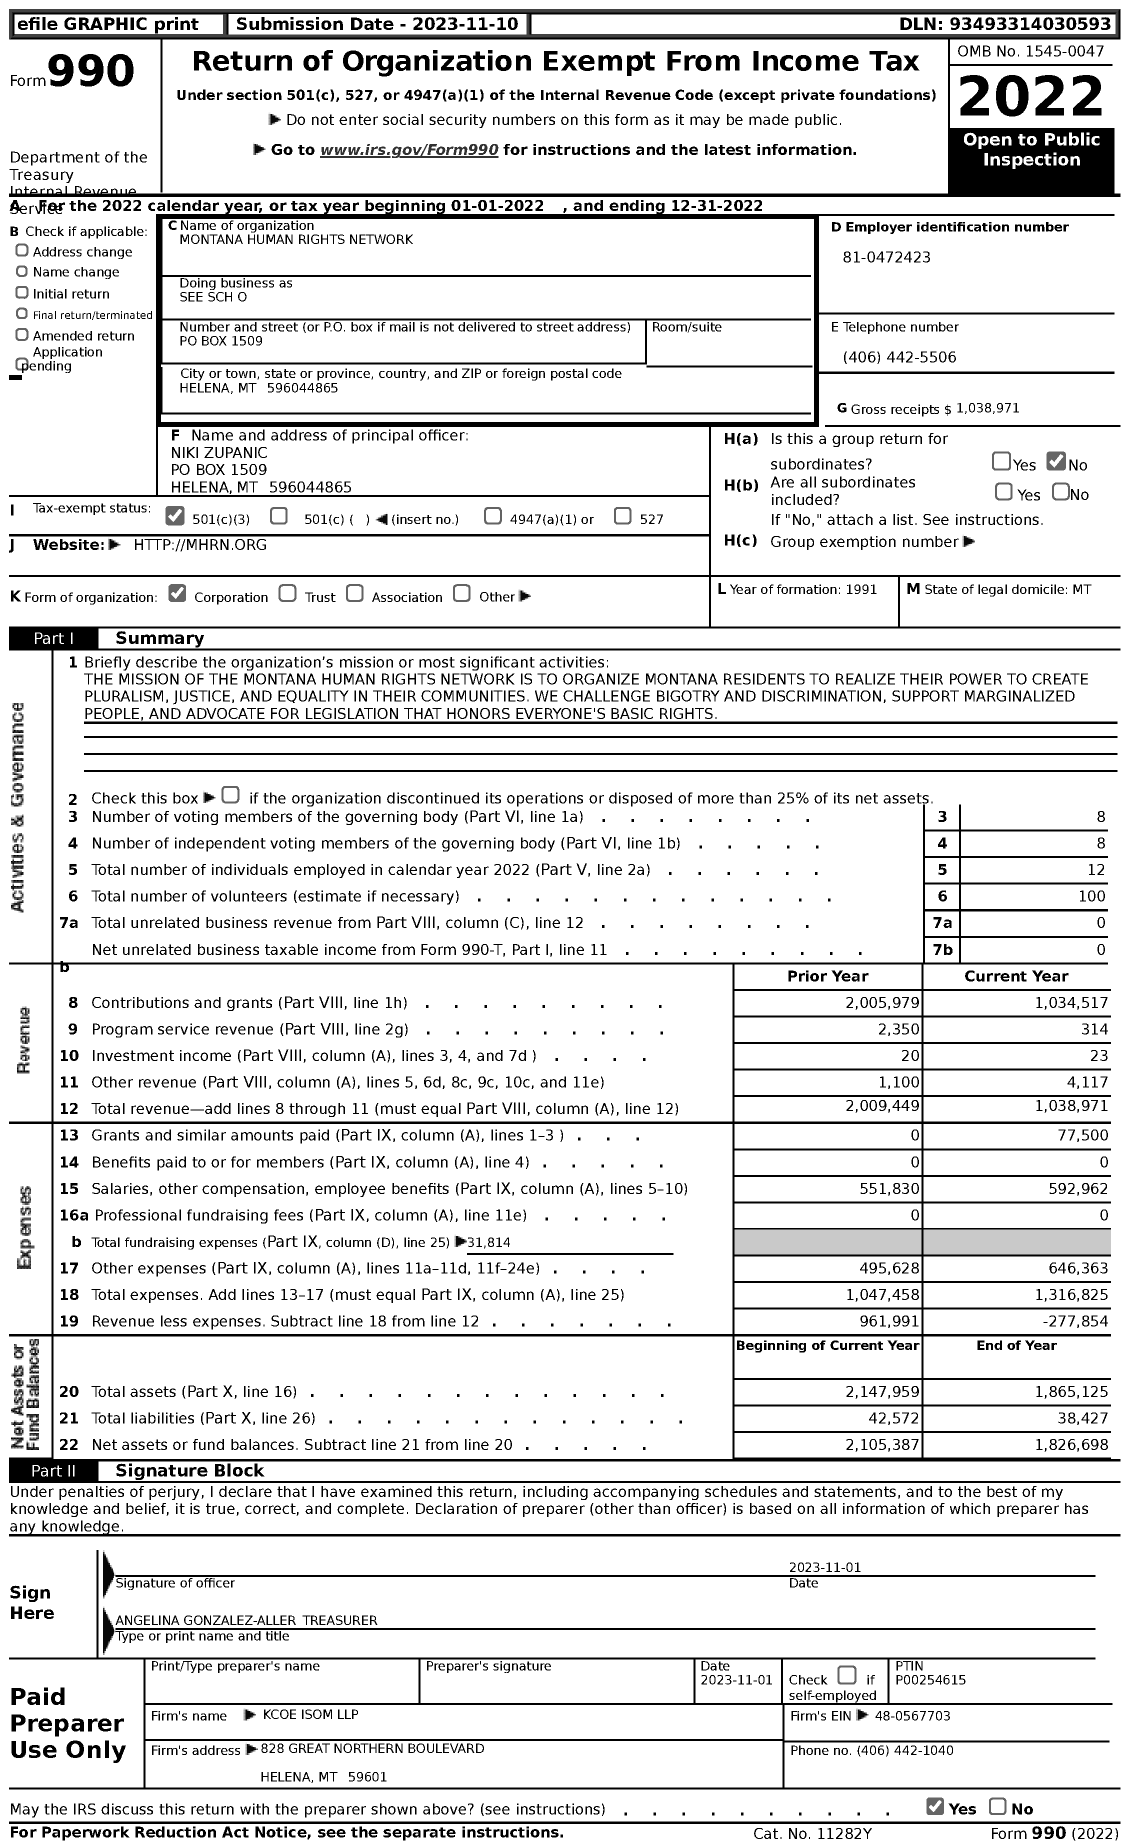 Image of first page of 2022 Form 990 for See SCH O